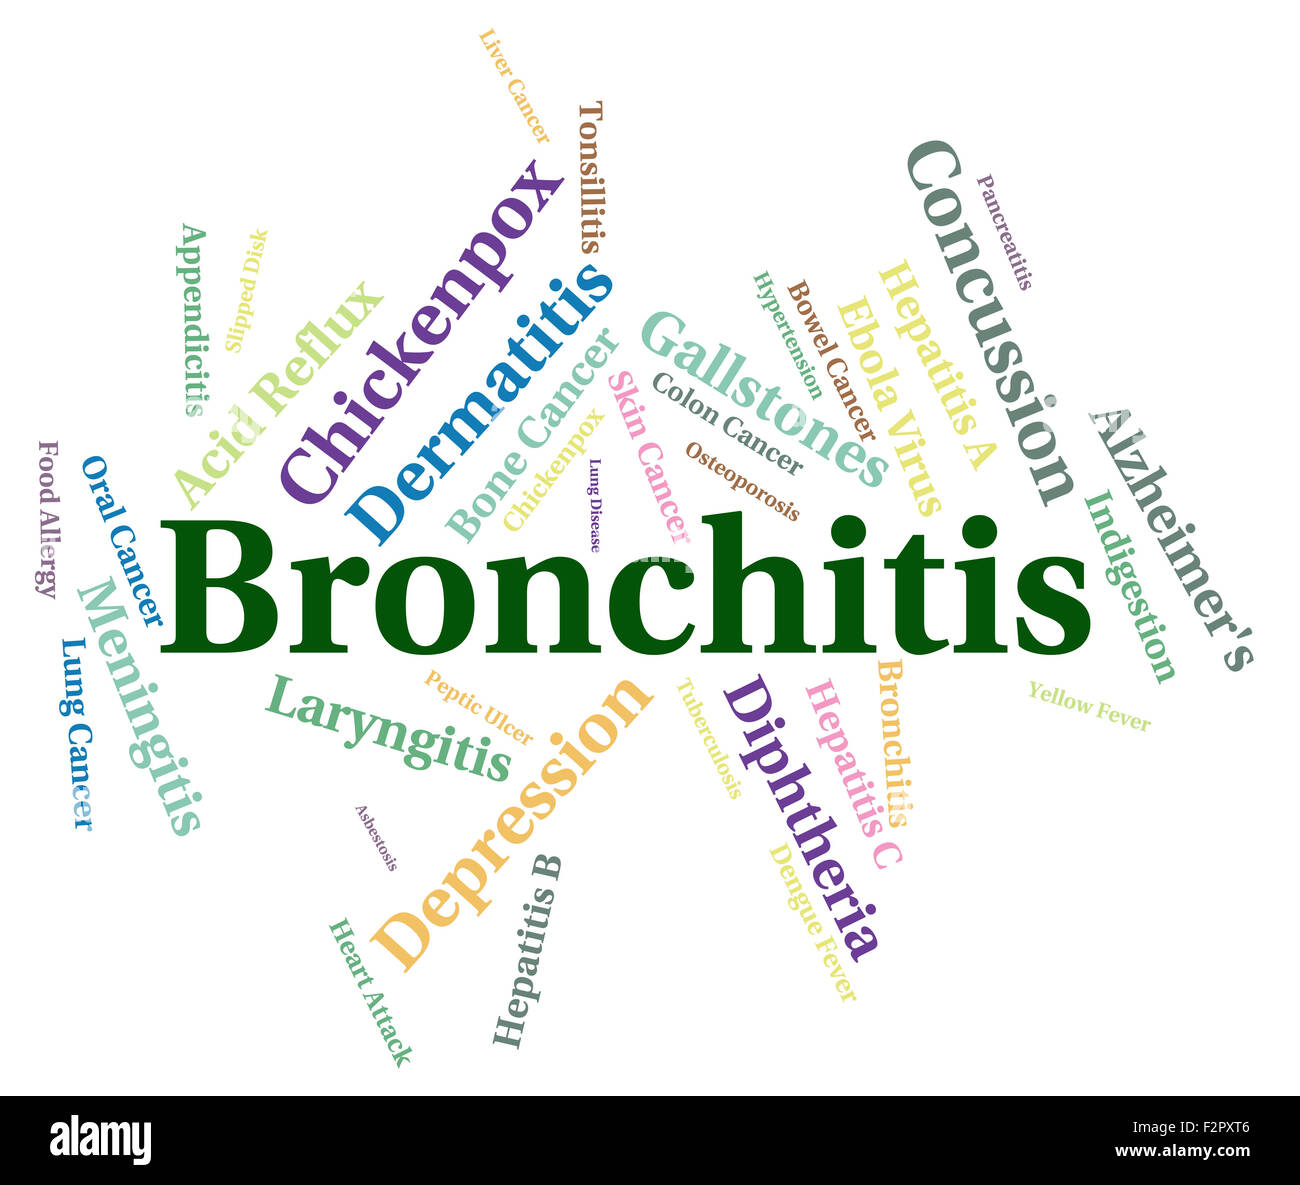 Bronchitis Word Indicating Respiratory Illness And Wordclouds Stock Photo